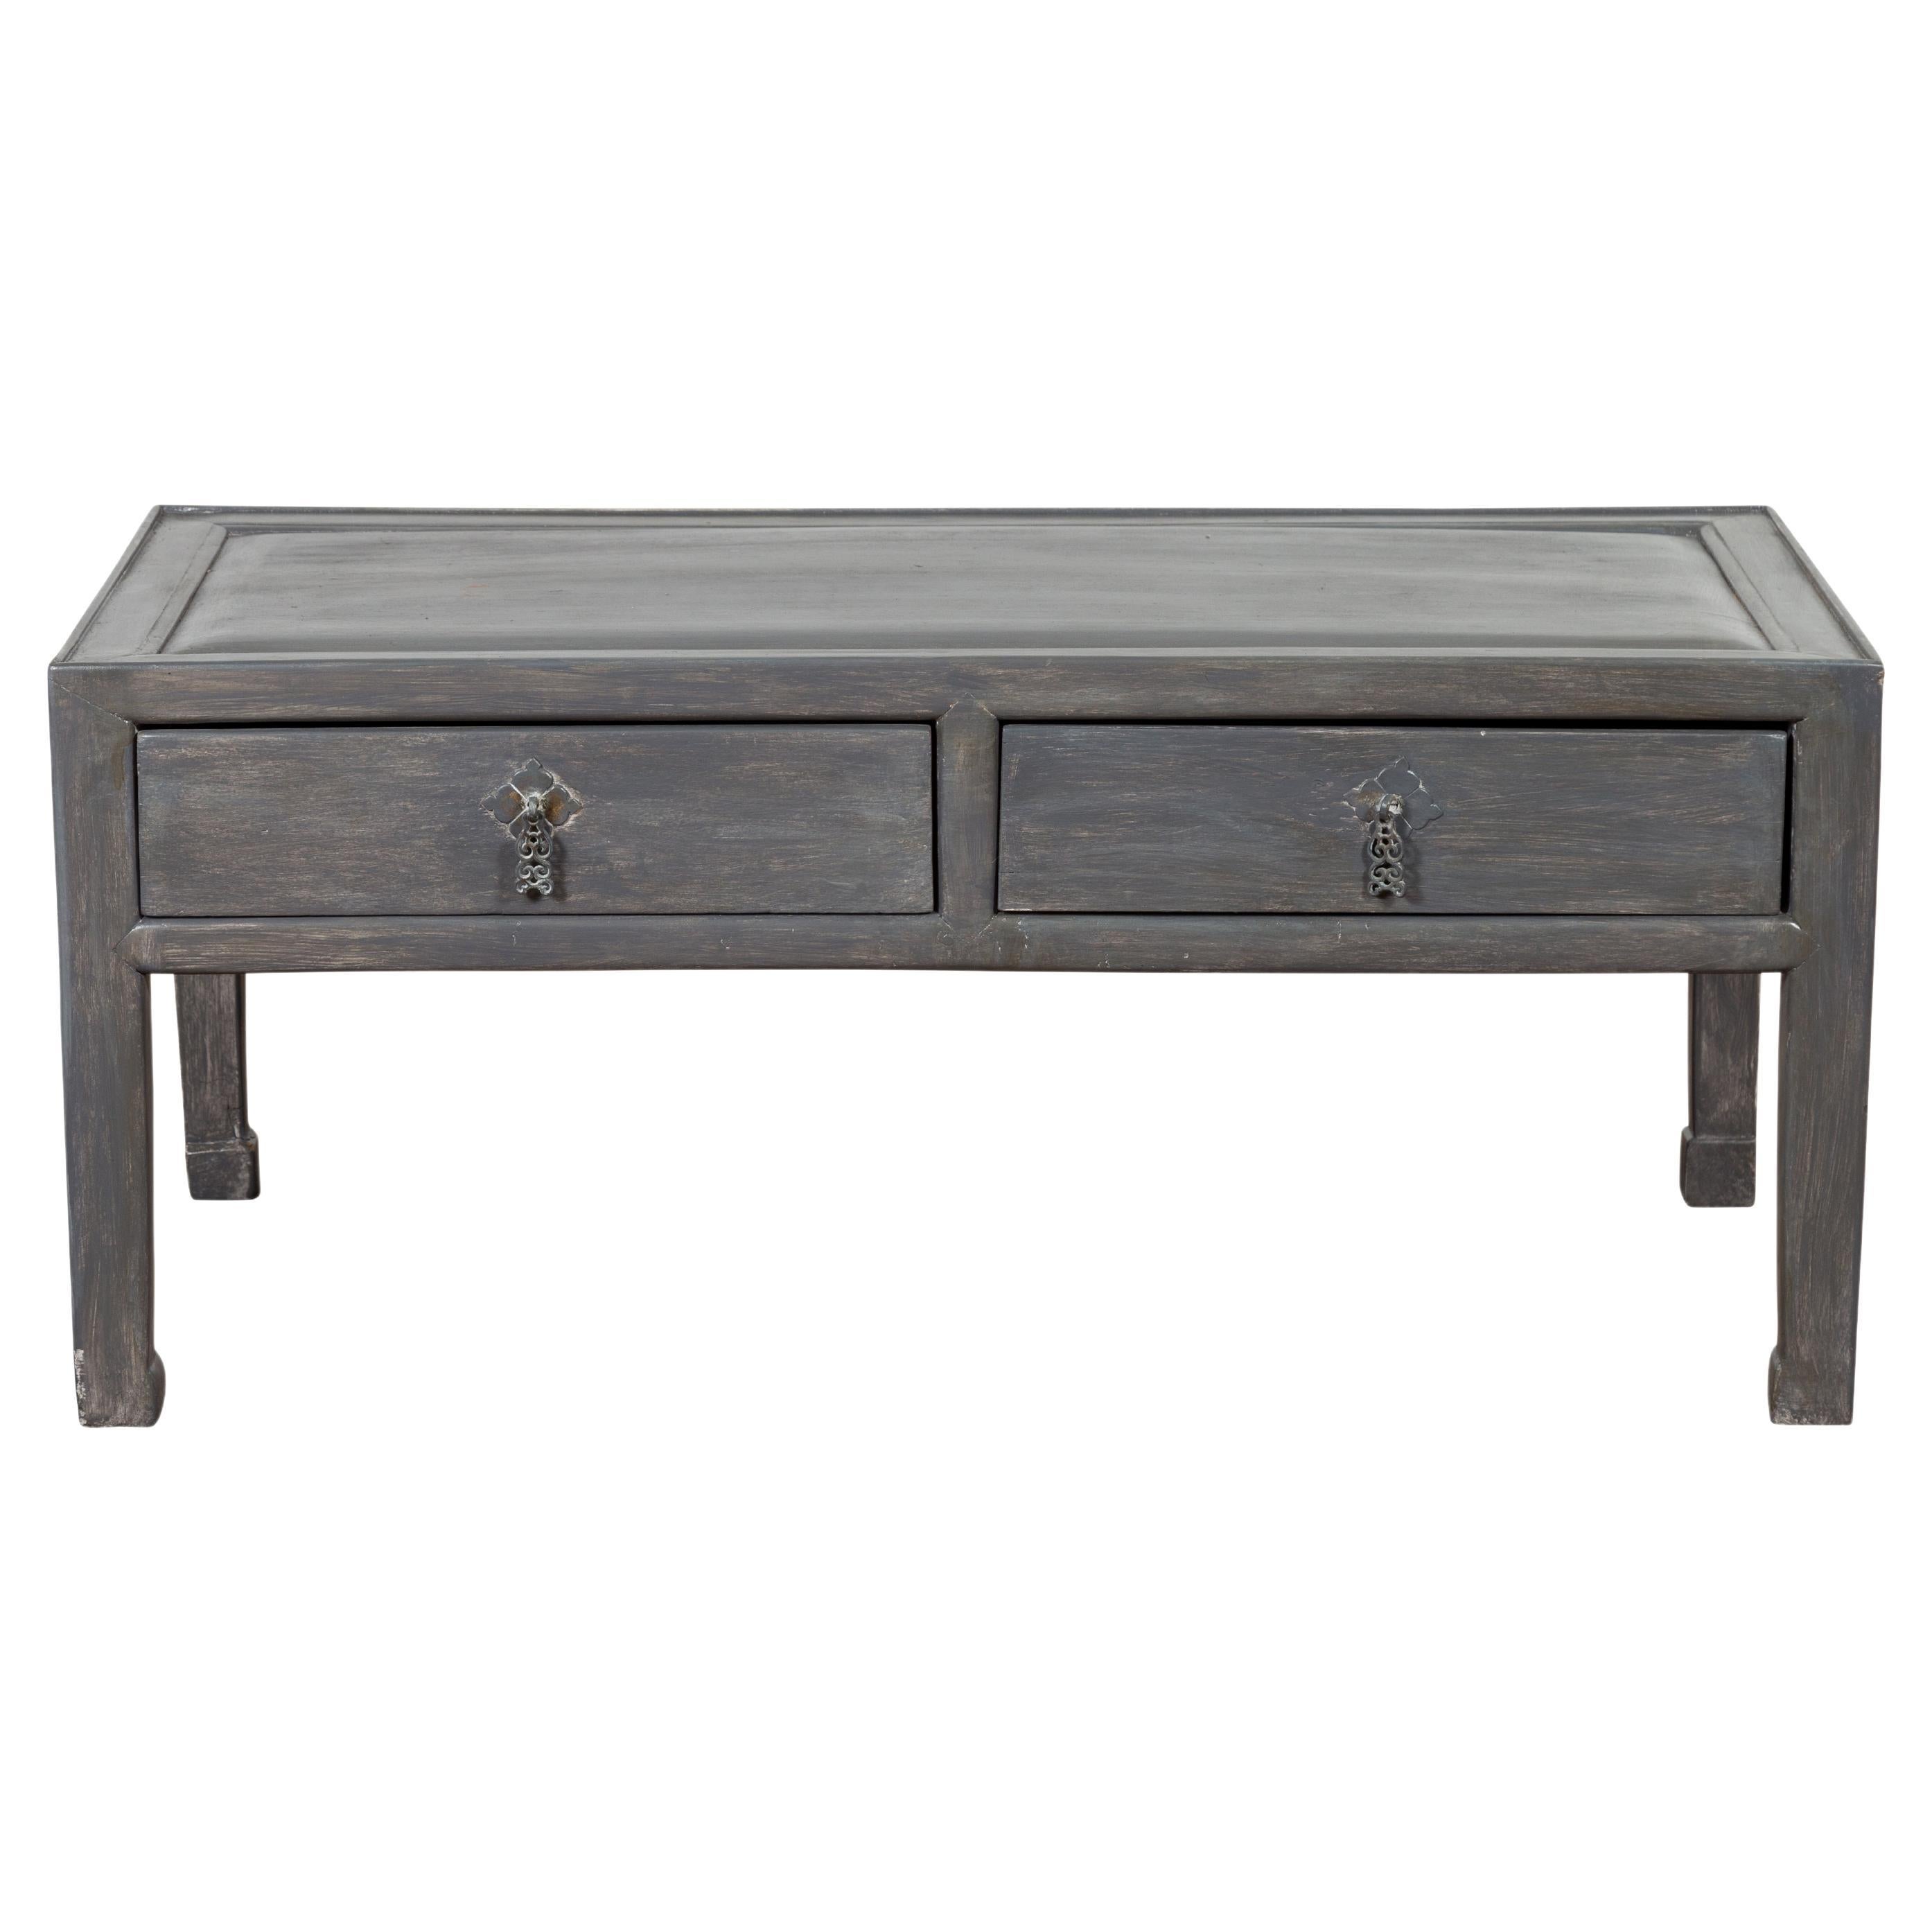 Chinese Late Qing Low Table with Two Drawers and Custom Grey Silver Lacquer